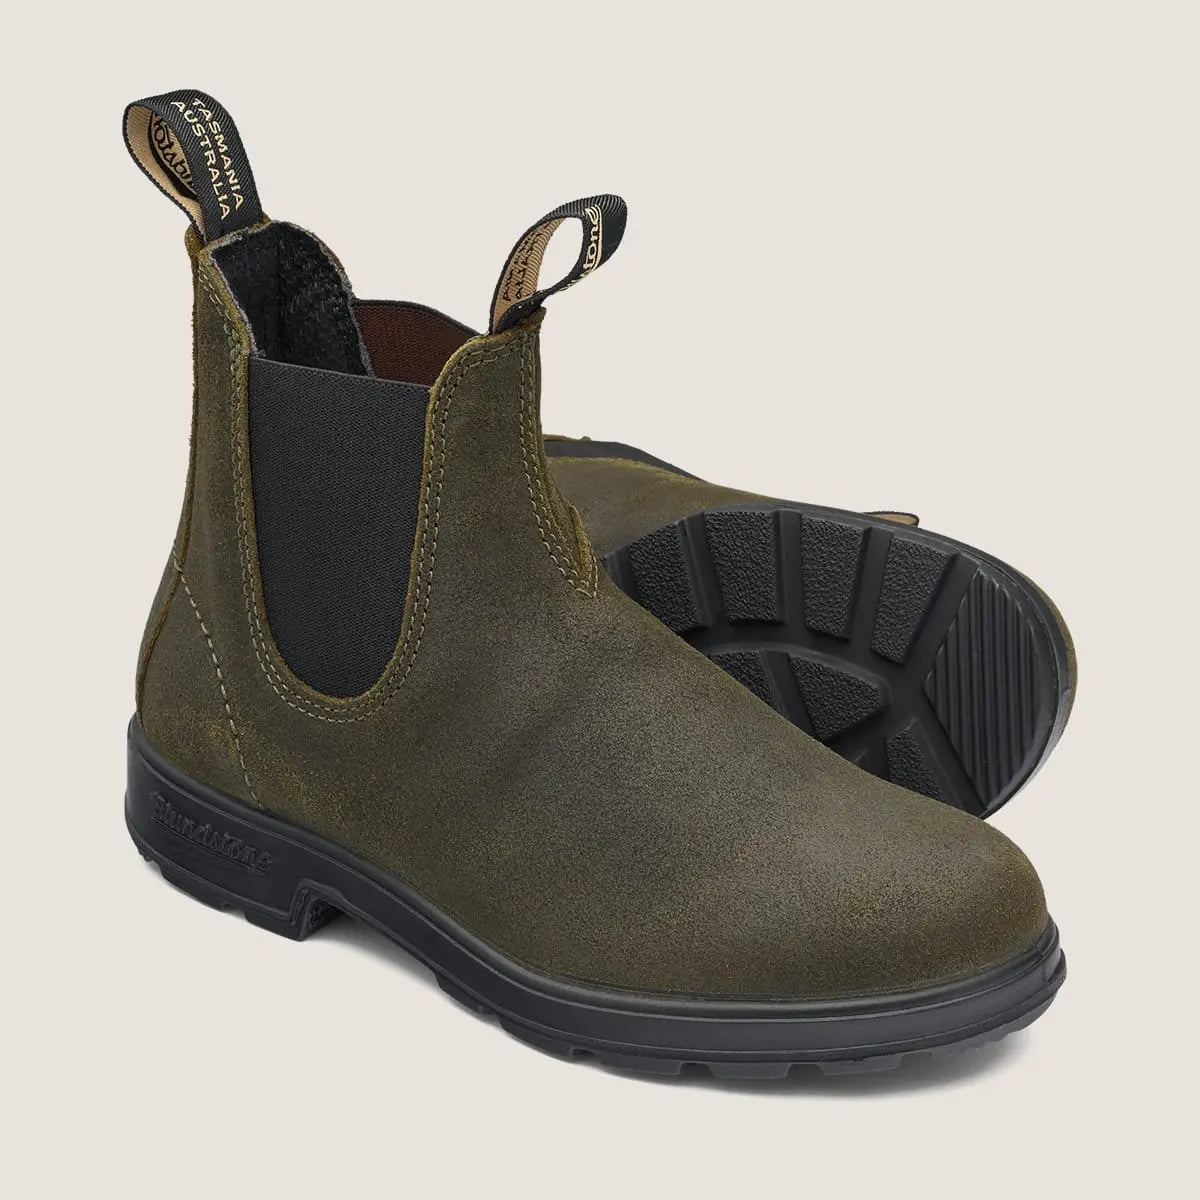 Blundstone - 1615 Chelsea Boot, Leather Lined - Dark Olive